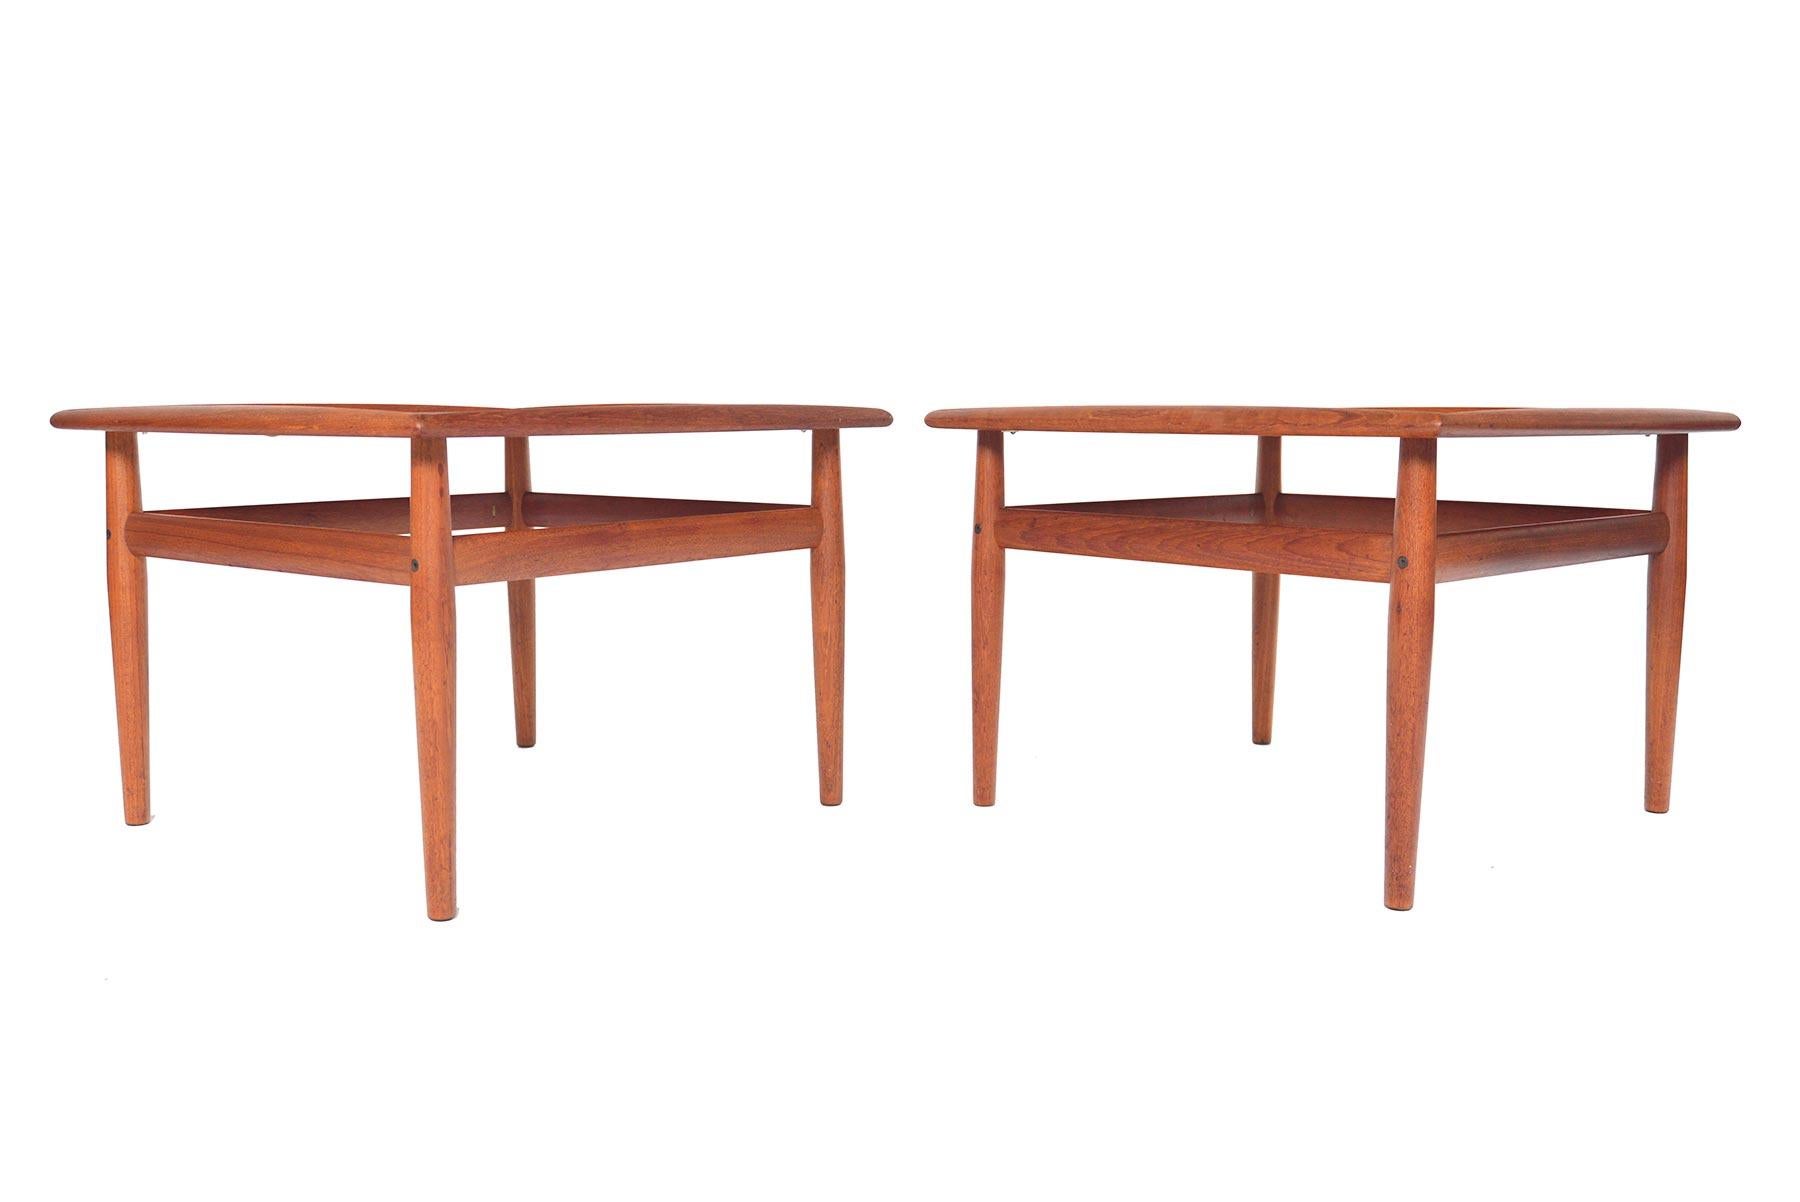 This pair of Danish modern teak side tables was designed by Grete Jalk for Glostrup Møbelfabrik in the early 1960s. Underneath the refined, handsome lines of these tables lies an extremely high level of skilled craftsmanship, which can be seen